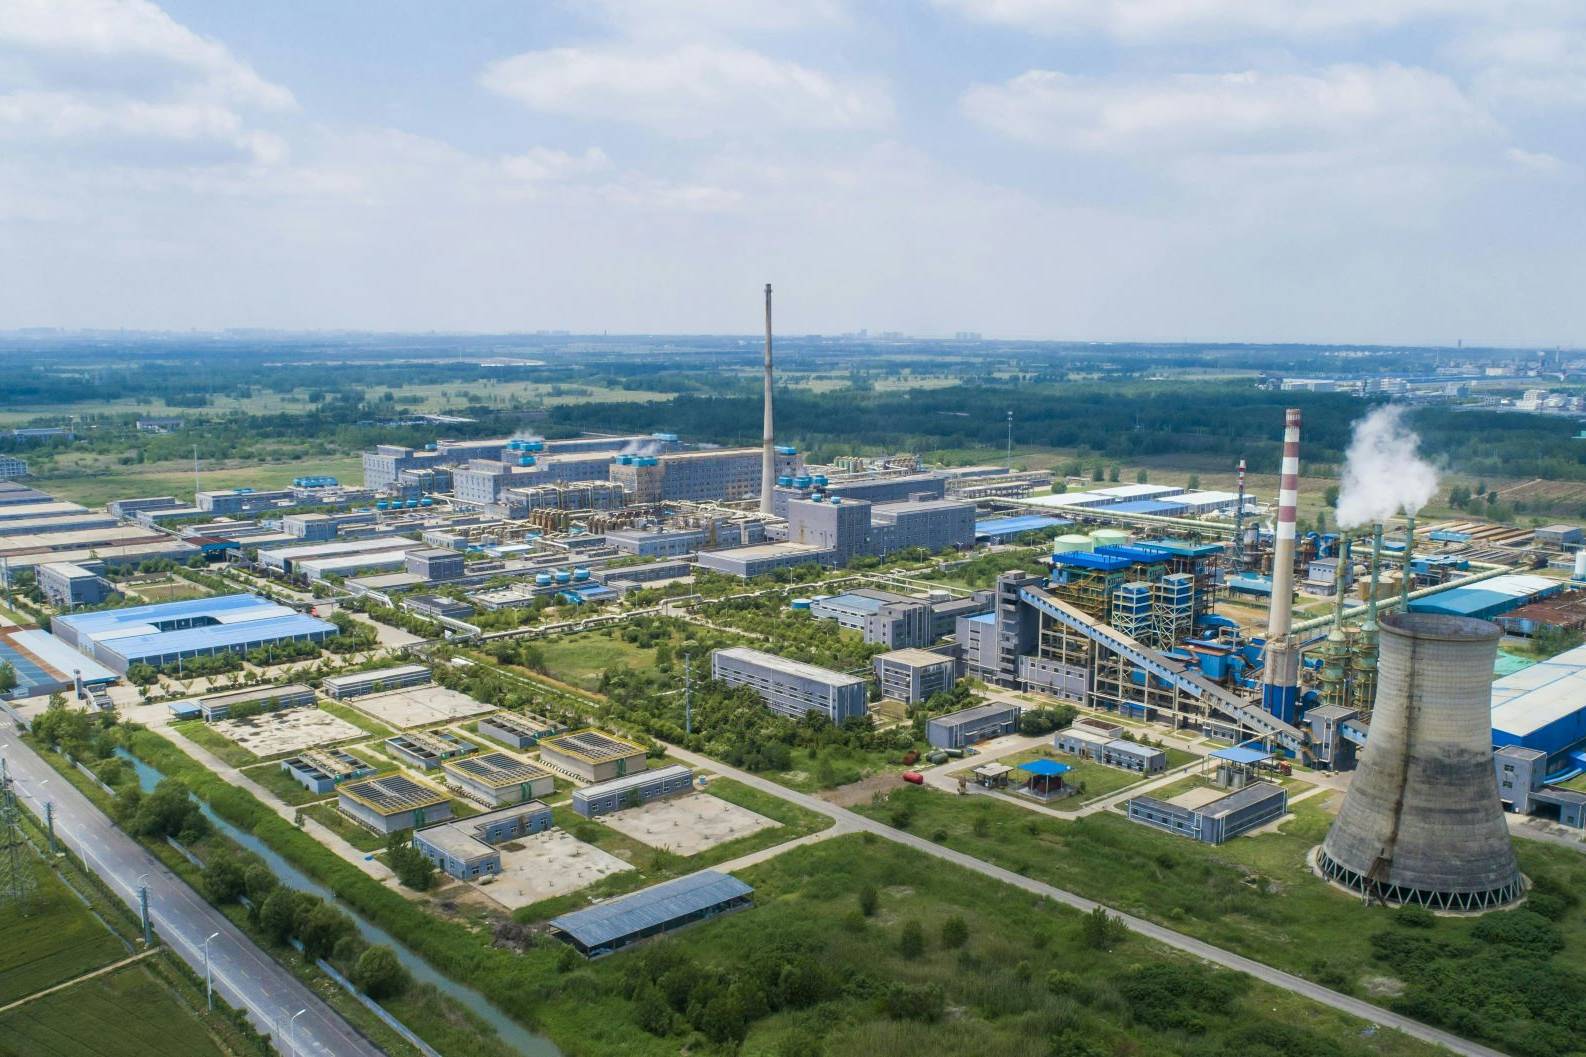 Sateri completes Higg FSLM assessment for its Chinese mills